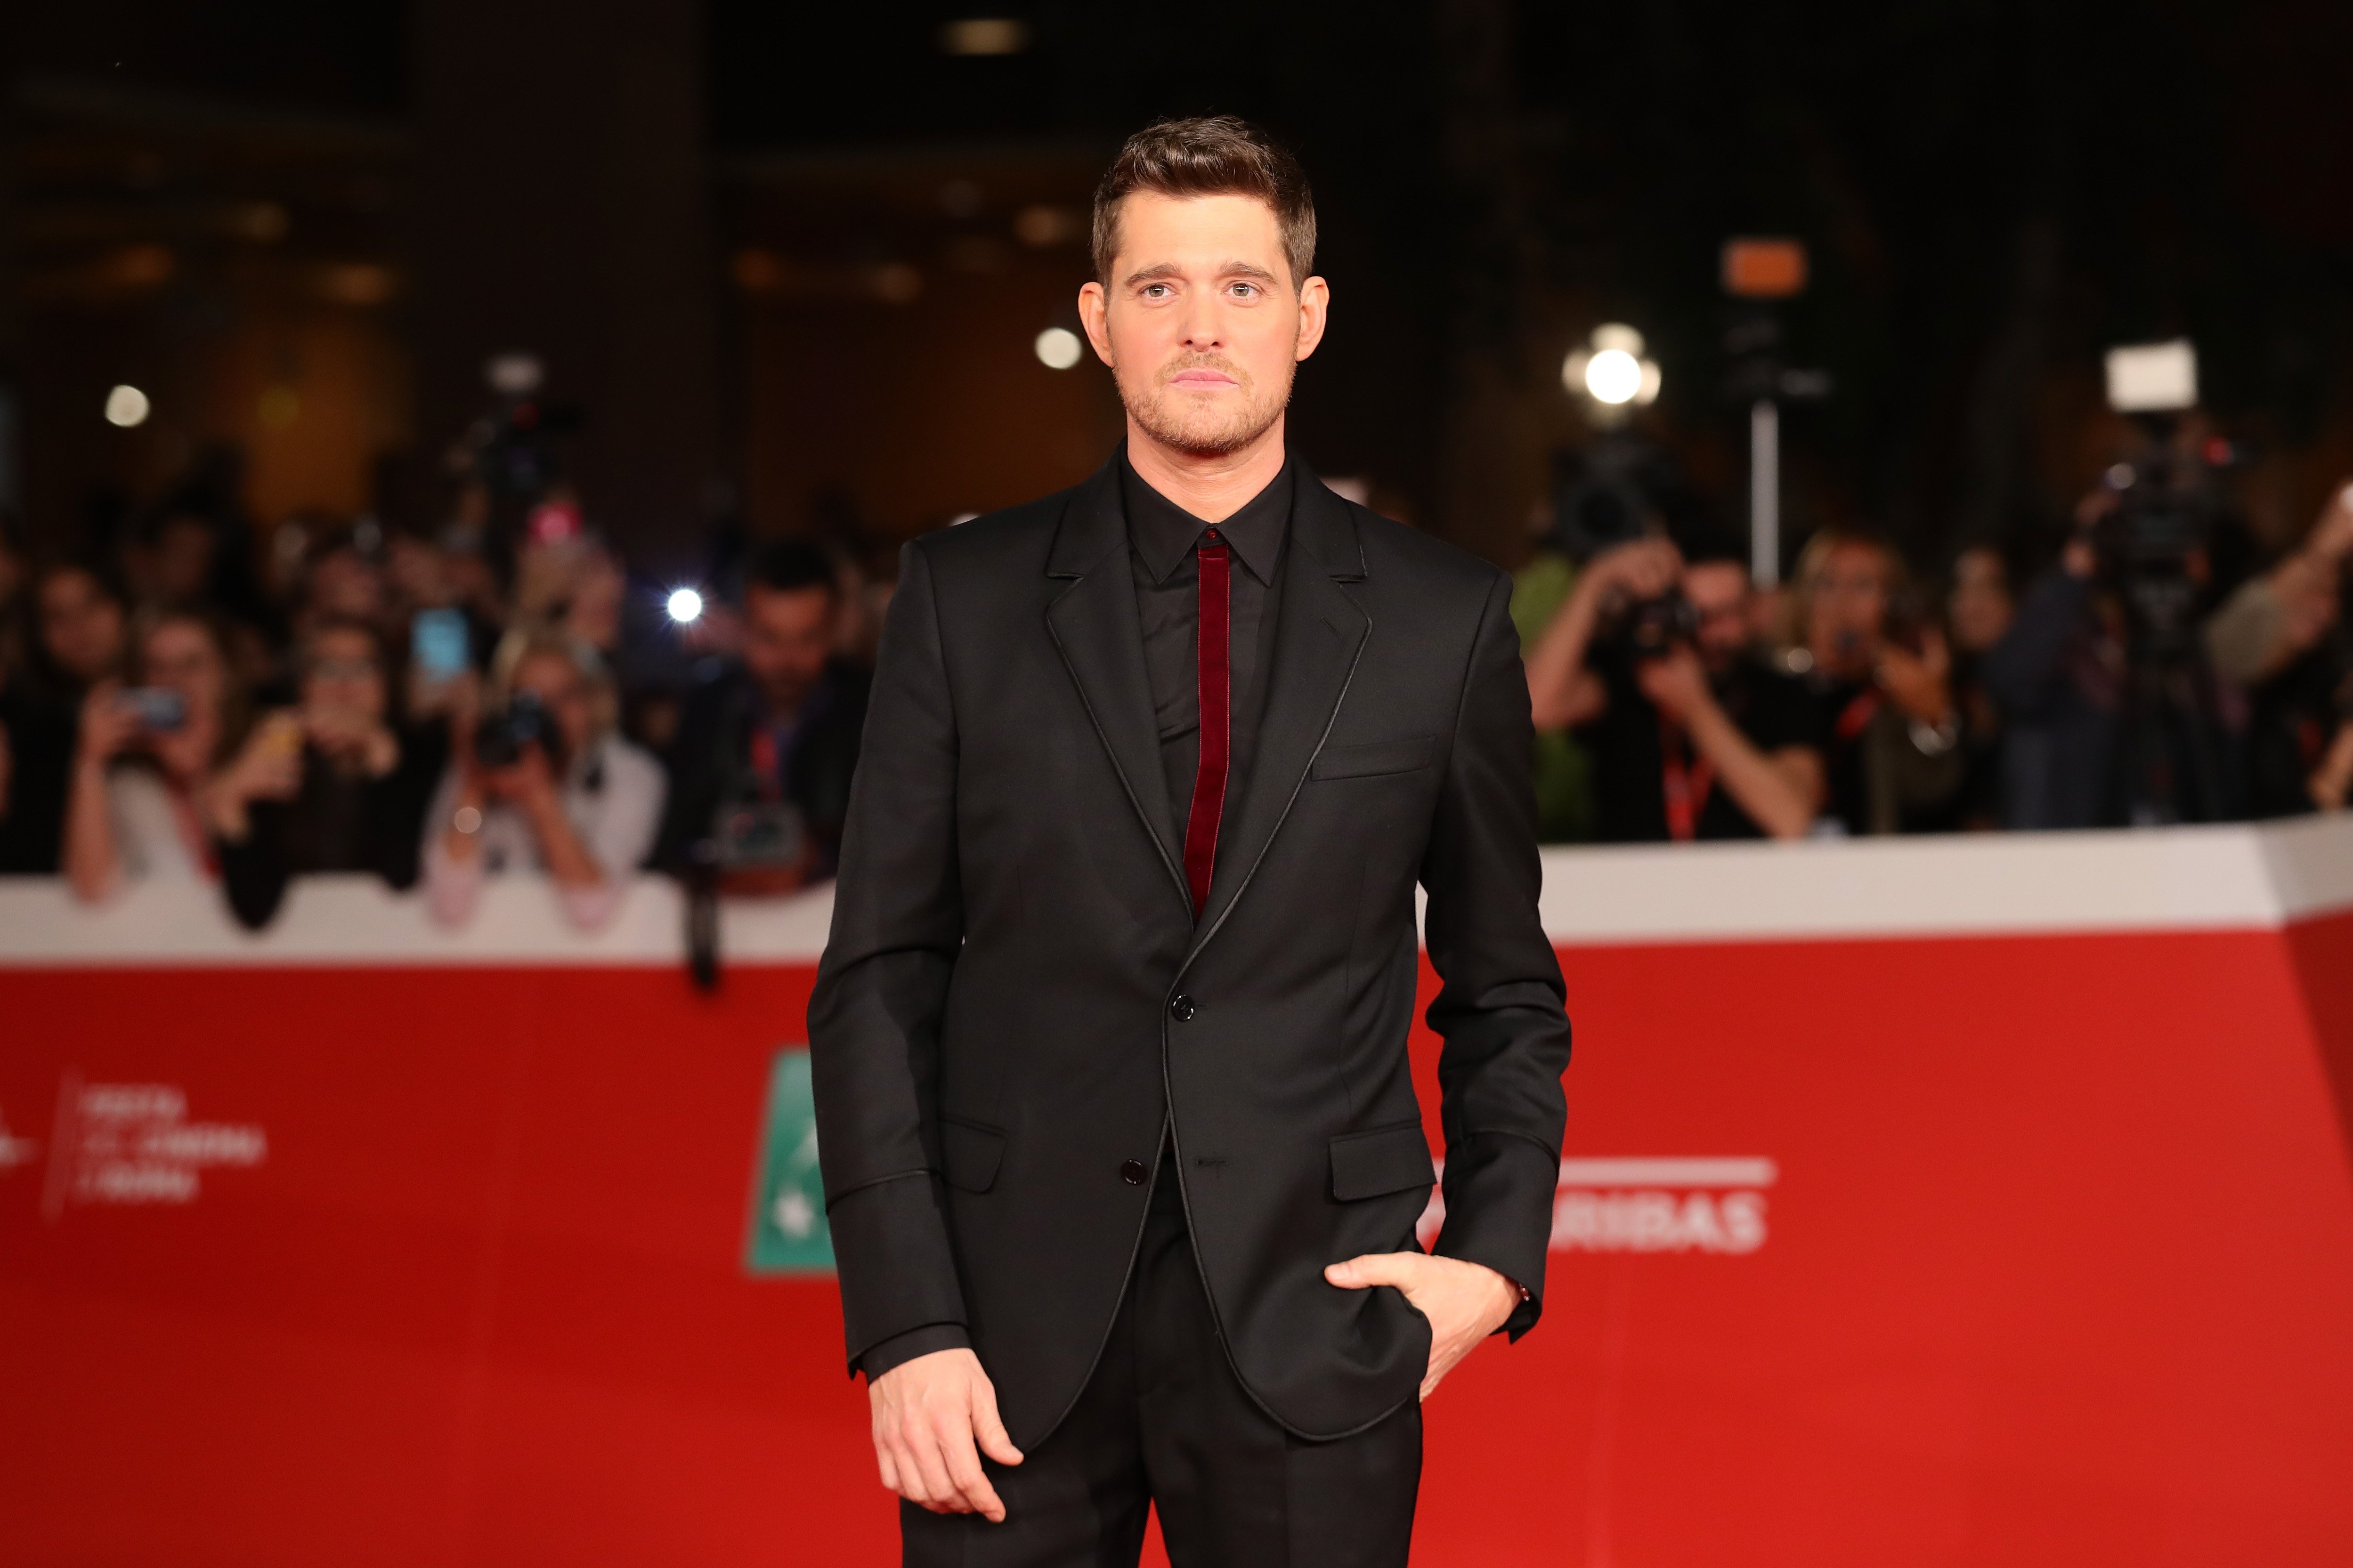 Michael Buble walks a red carpet for 'Tour Stop 148' during the 11th Rome Film Festival at Auditorium Parco Della Musica on October 14, 2016 in Rome, Italy | Photo: Getty Images